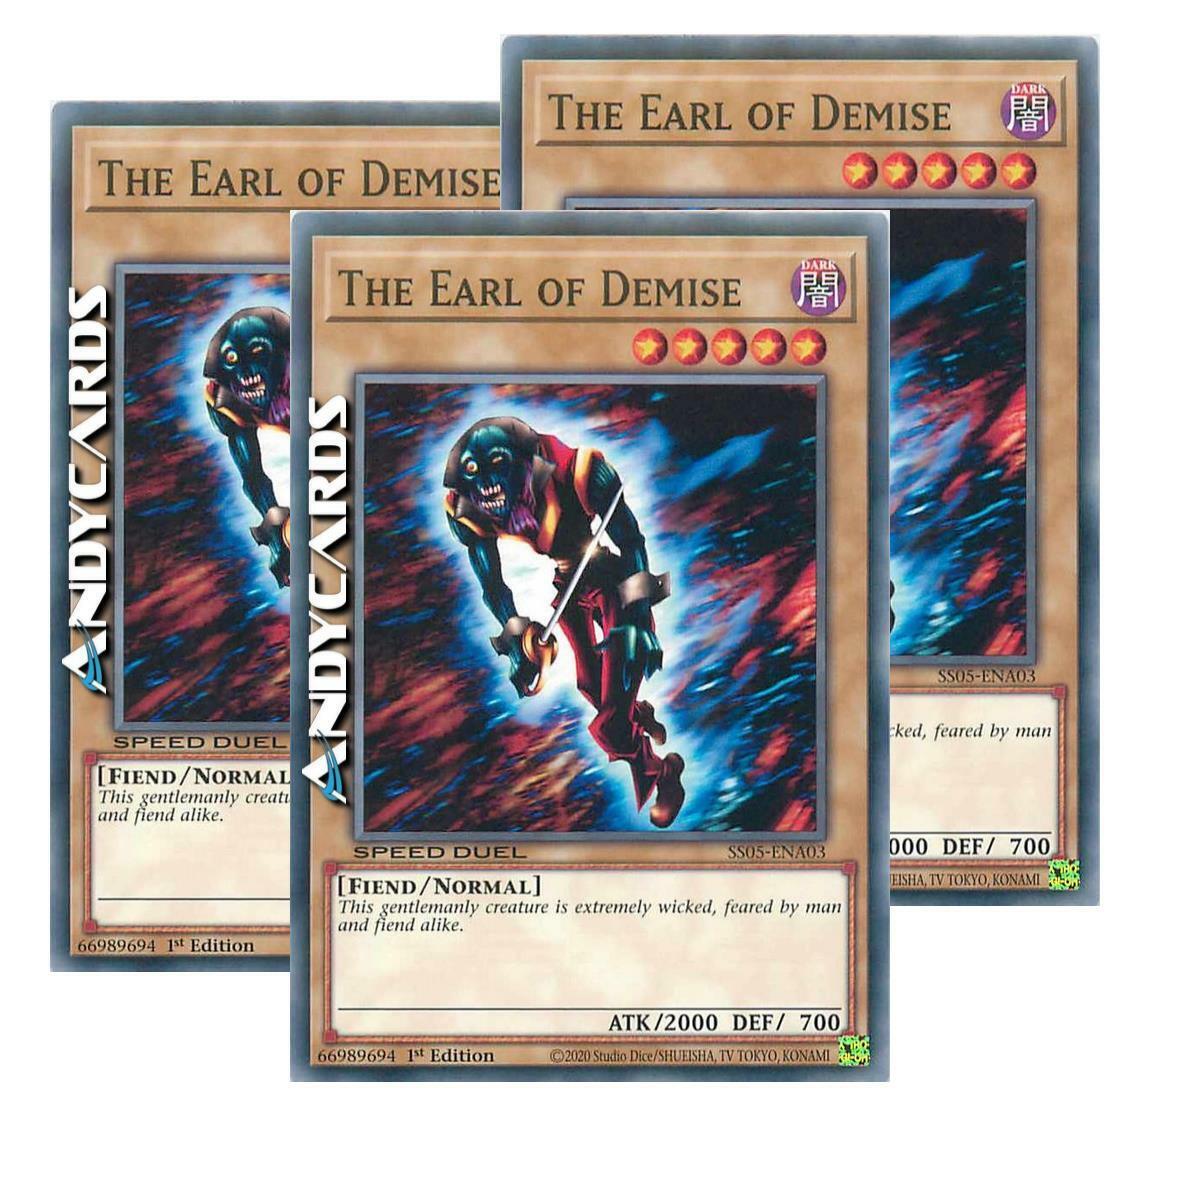 3x THE EARL OF DEMISE (SPEED DUEL) Common • SS05 ENA03